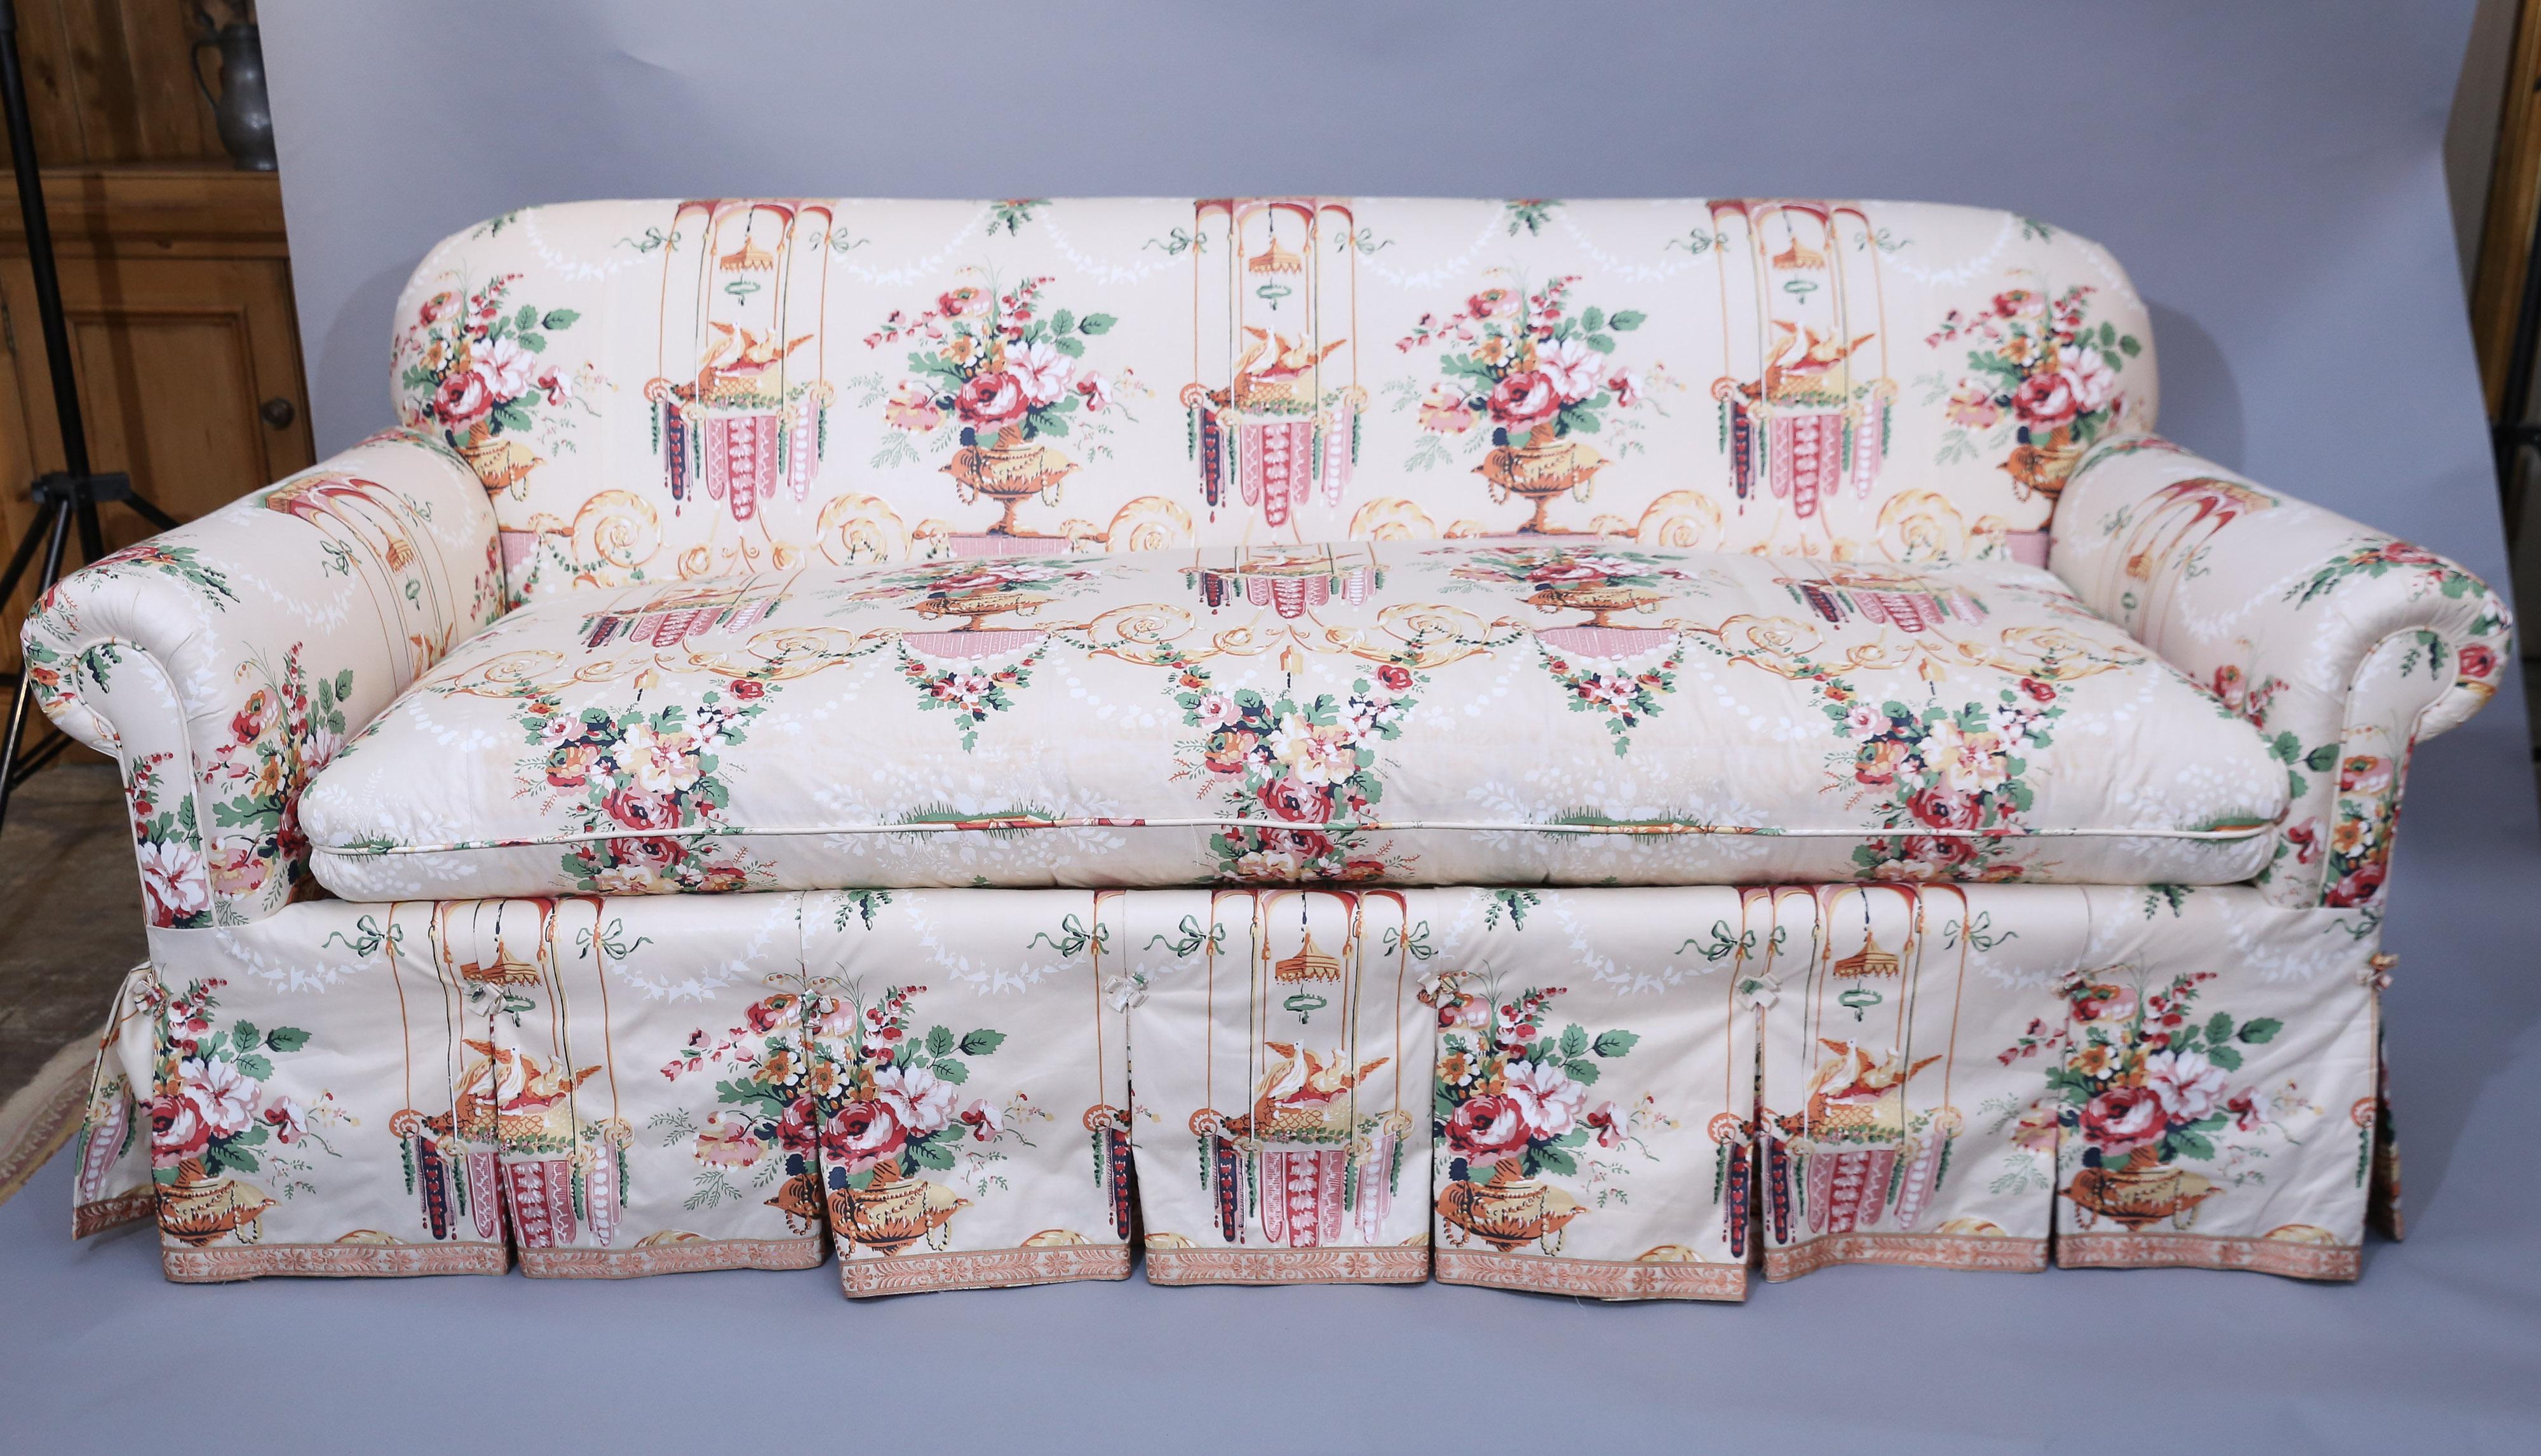 Roll arm, knife edge cushioned sofa is upholstered in a cotton floral print. Sofa upholstery is finely detailed with pleated back and sides and a deck skirt.
There are five assorted trimmed pillows.

Pair of Slipper chairs are in same fabric and are